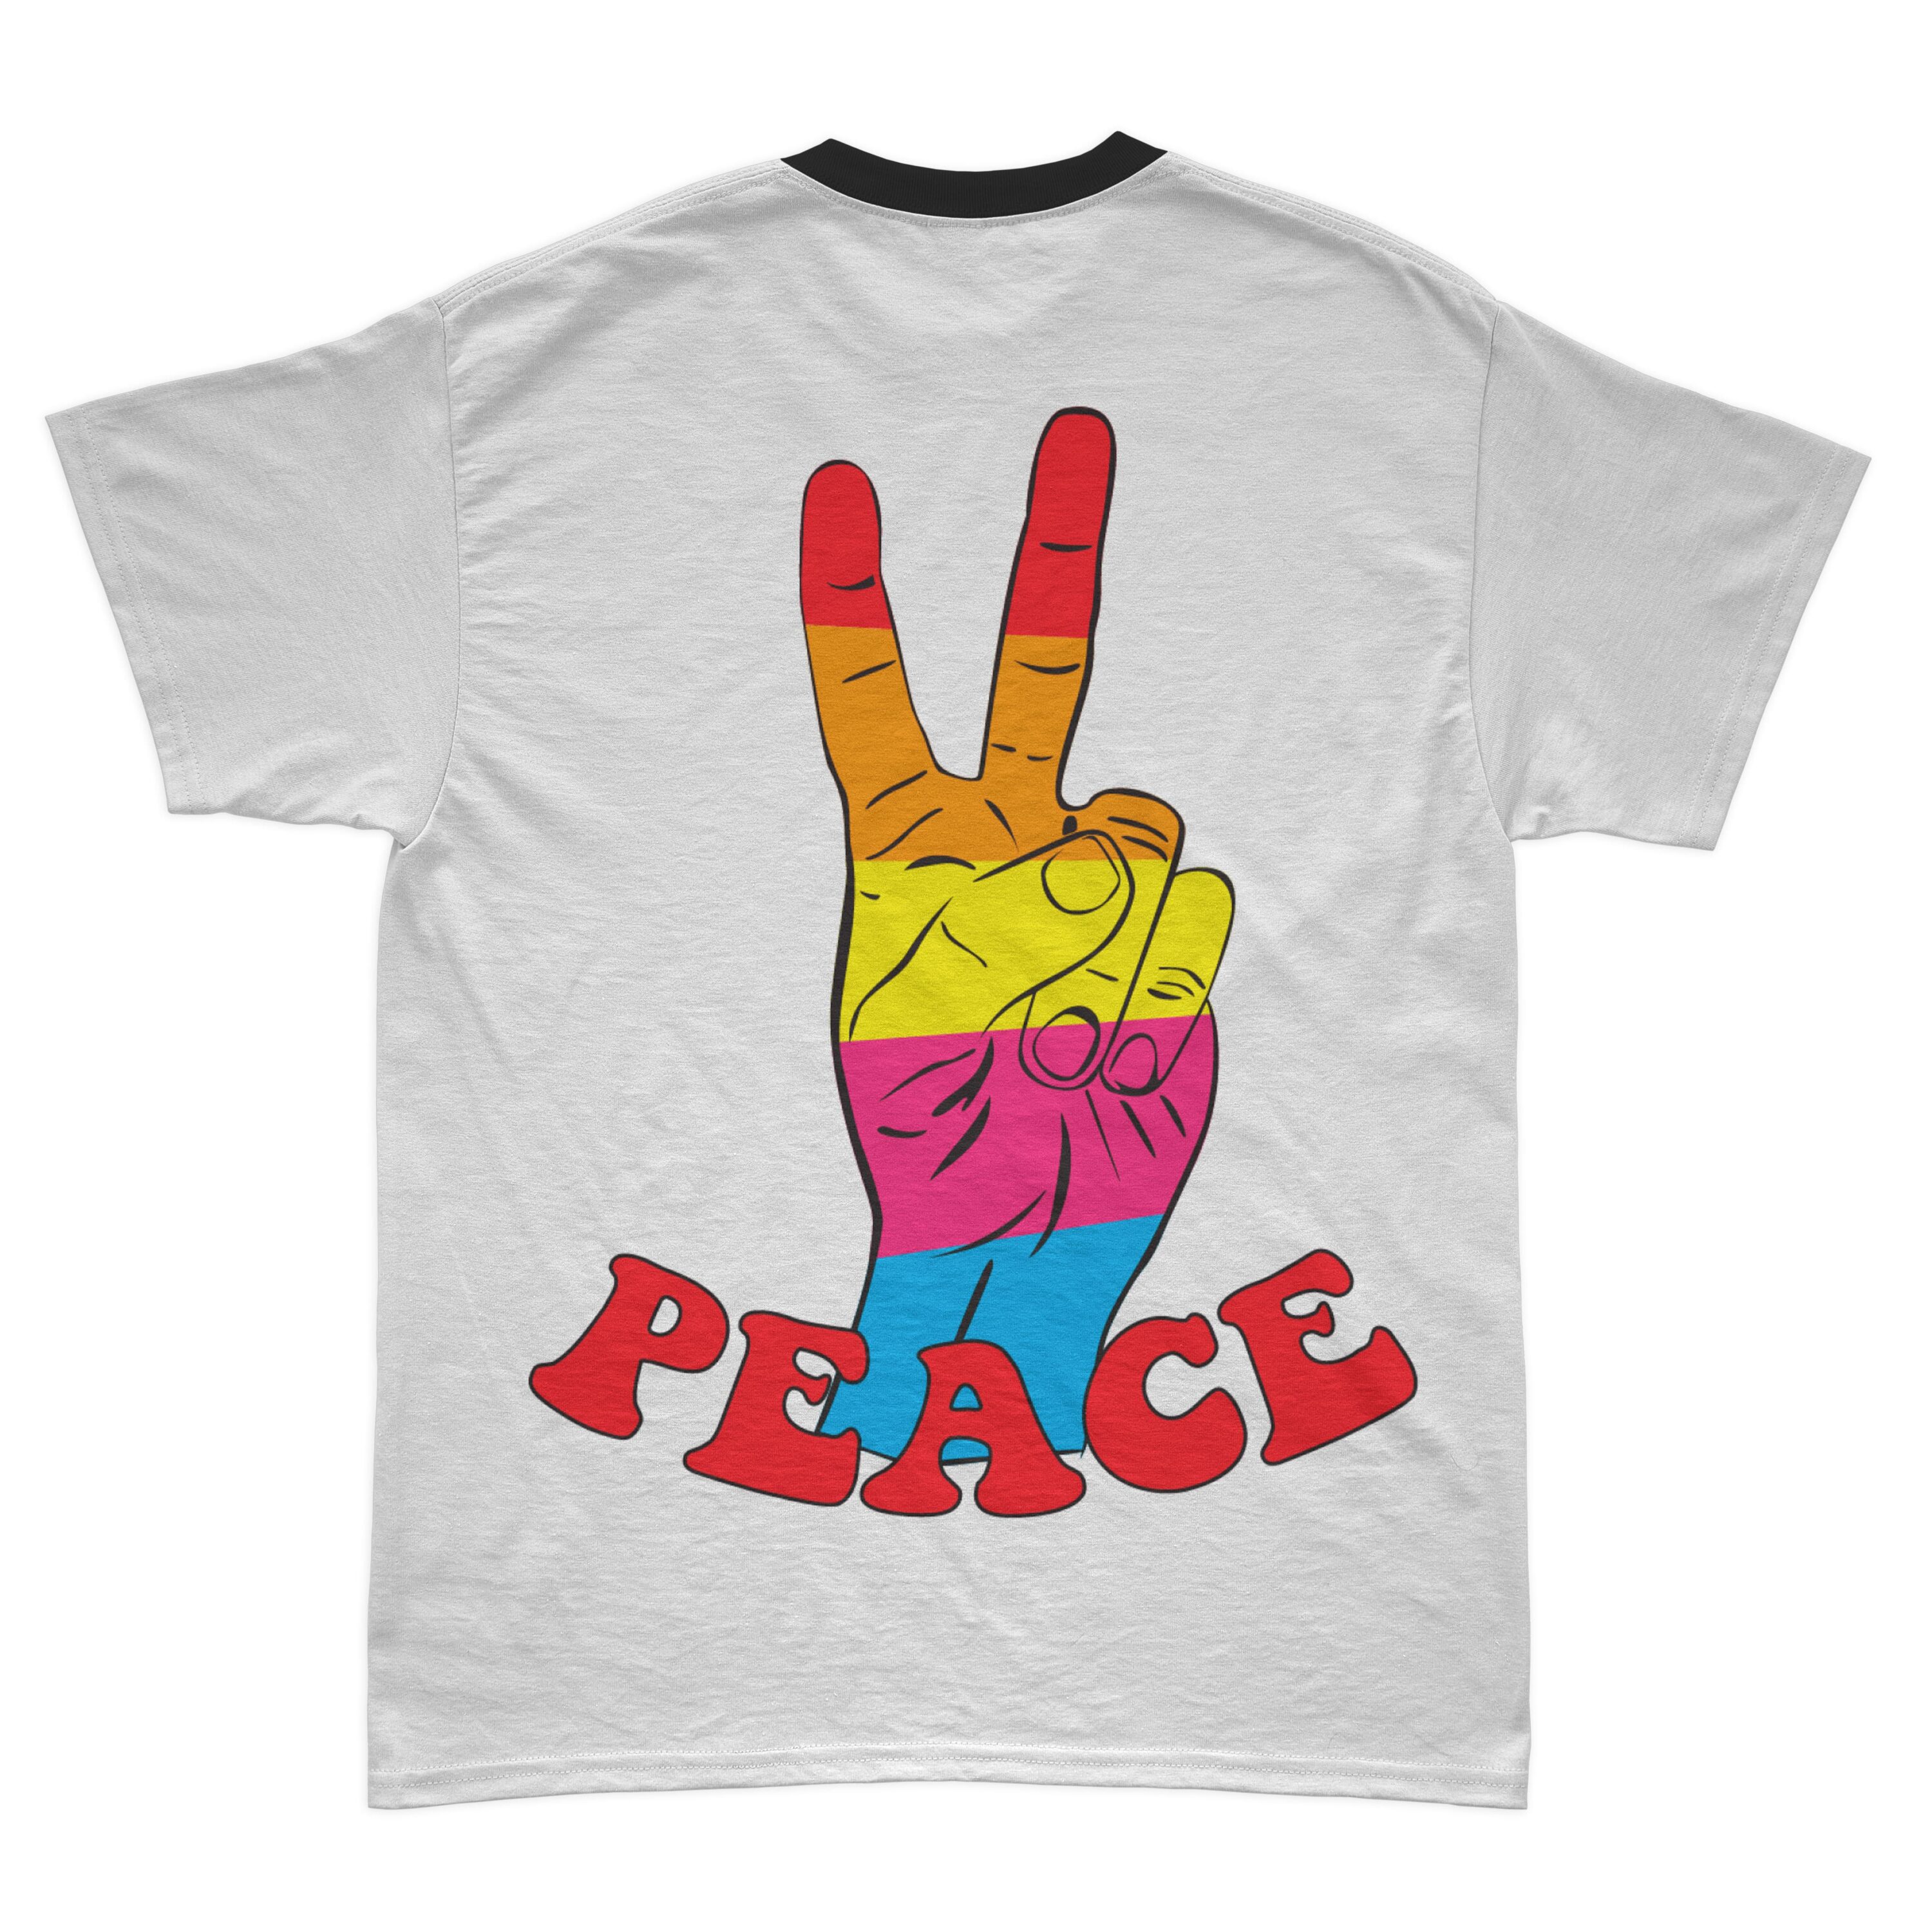 T-shirt design with peace out element.